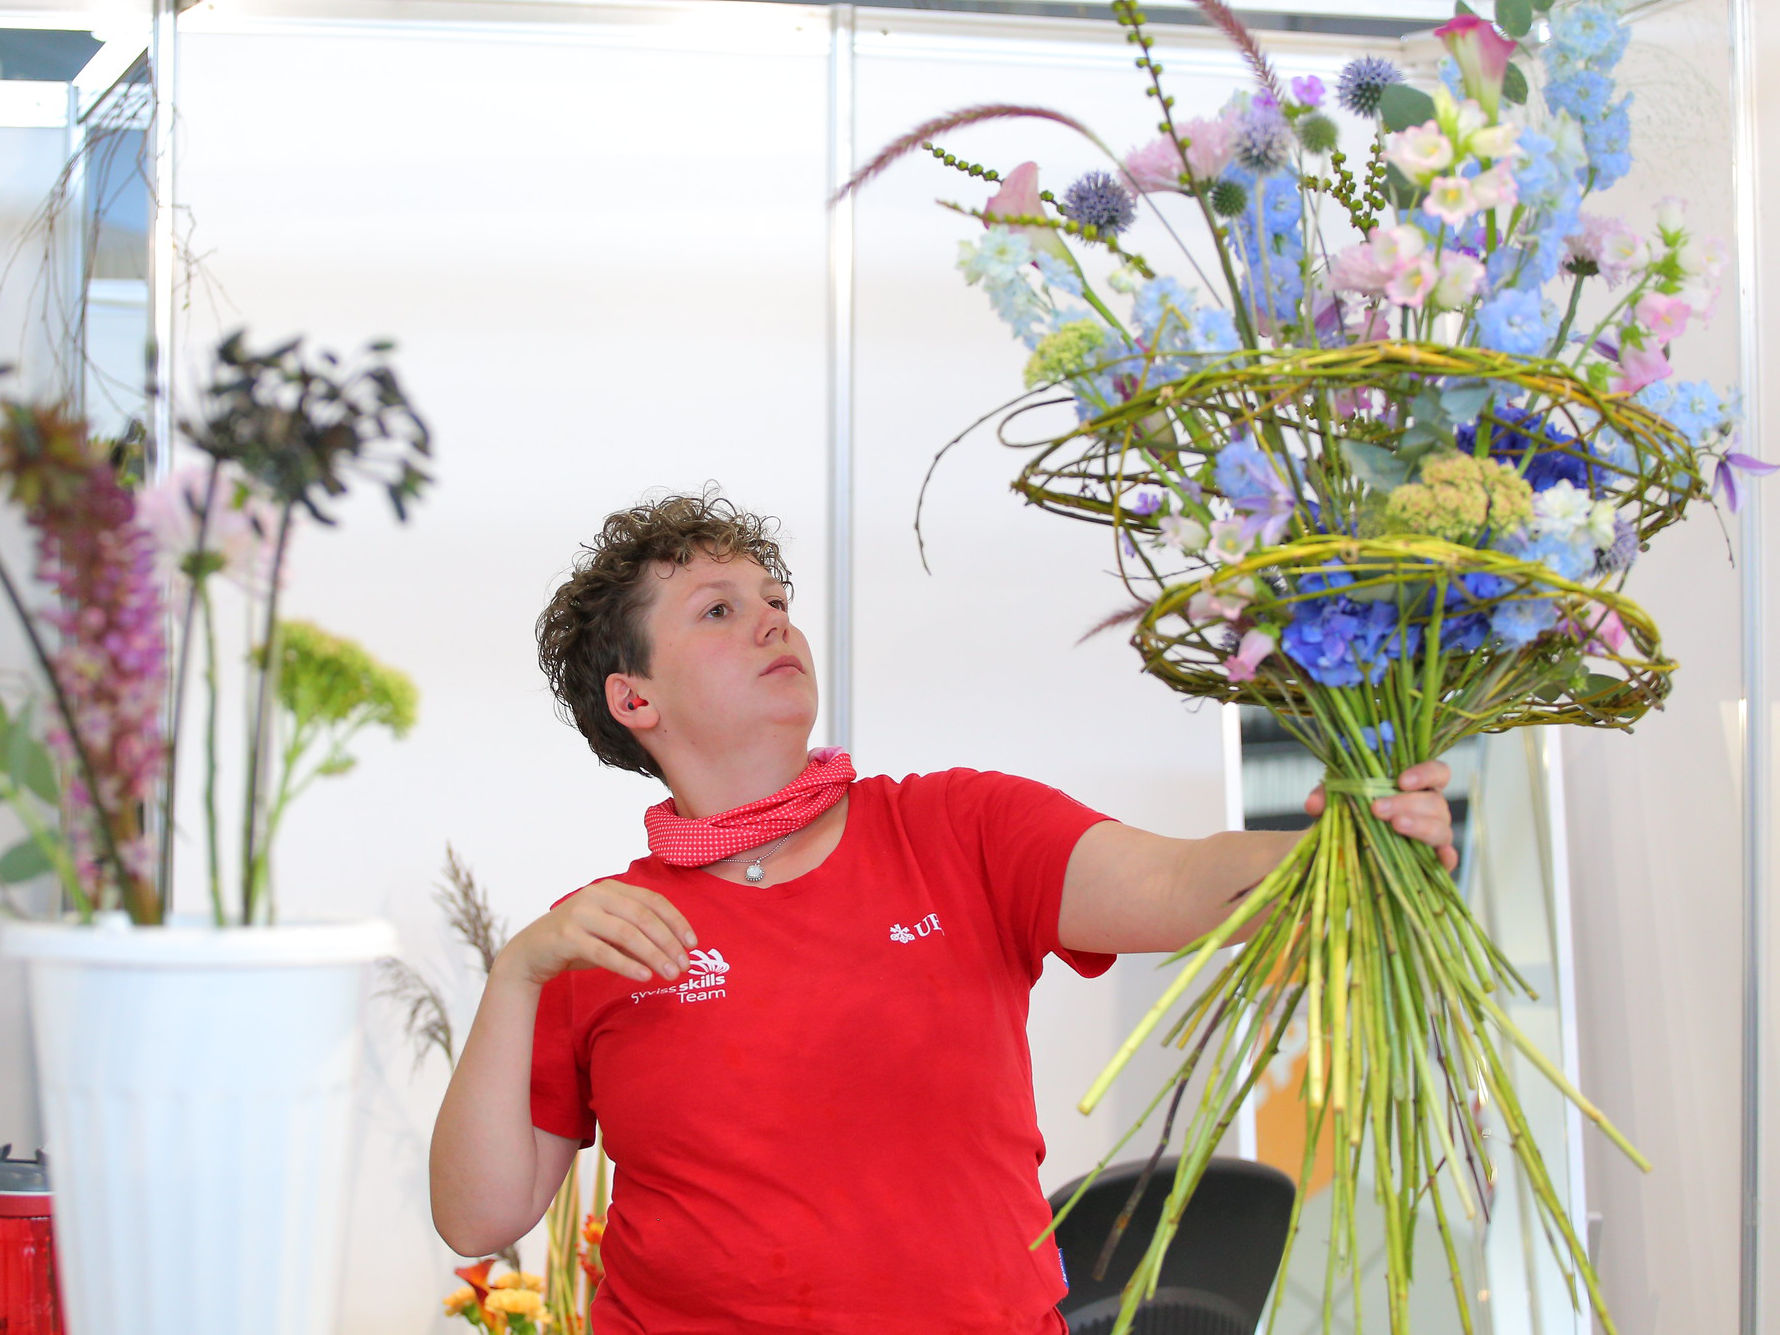 A floristry competitor from the Switzerland at WorldSkills Kazan 2019.